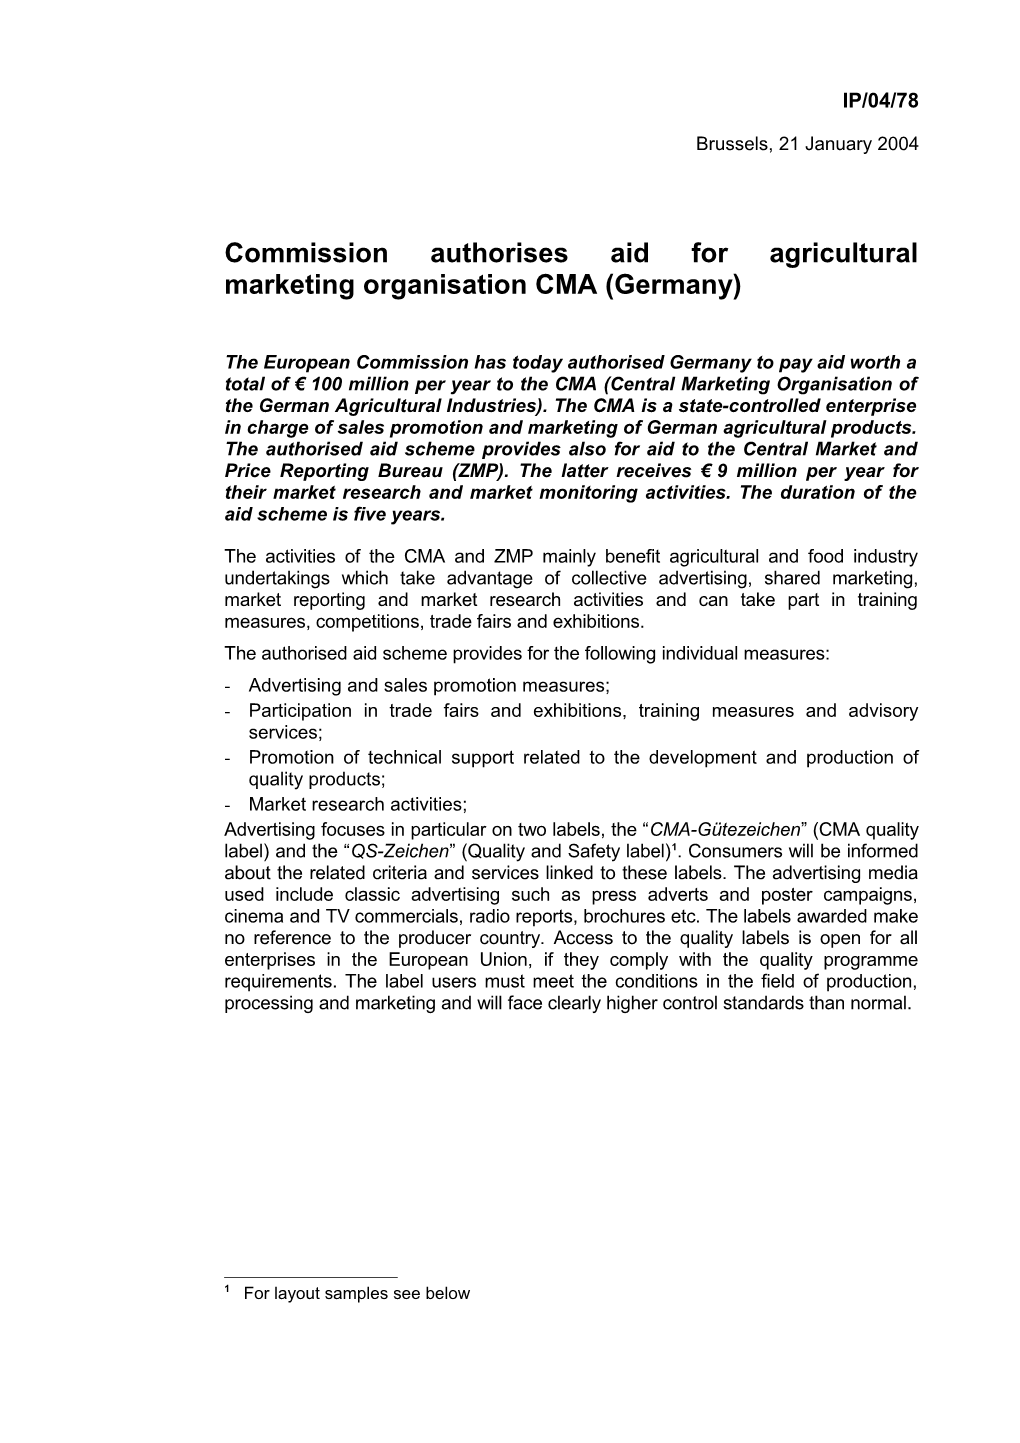 Commission Authorises Aid for Agricultural Marketing Organisation CMA (Germany)